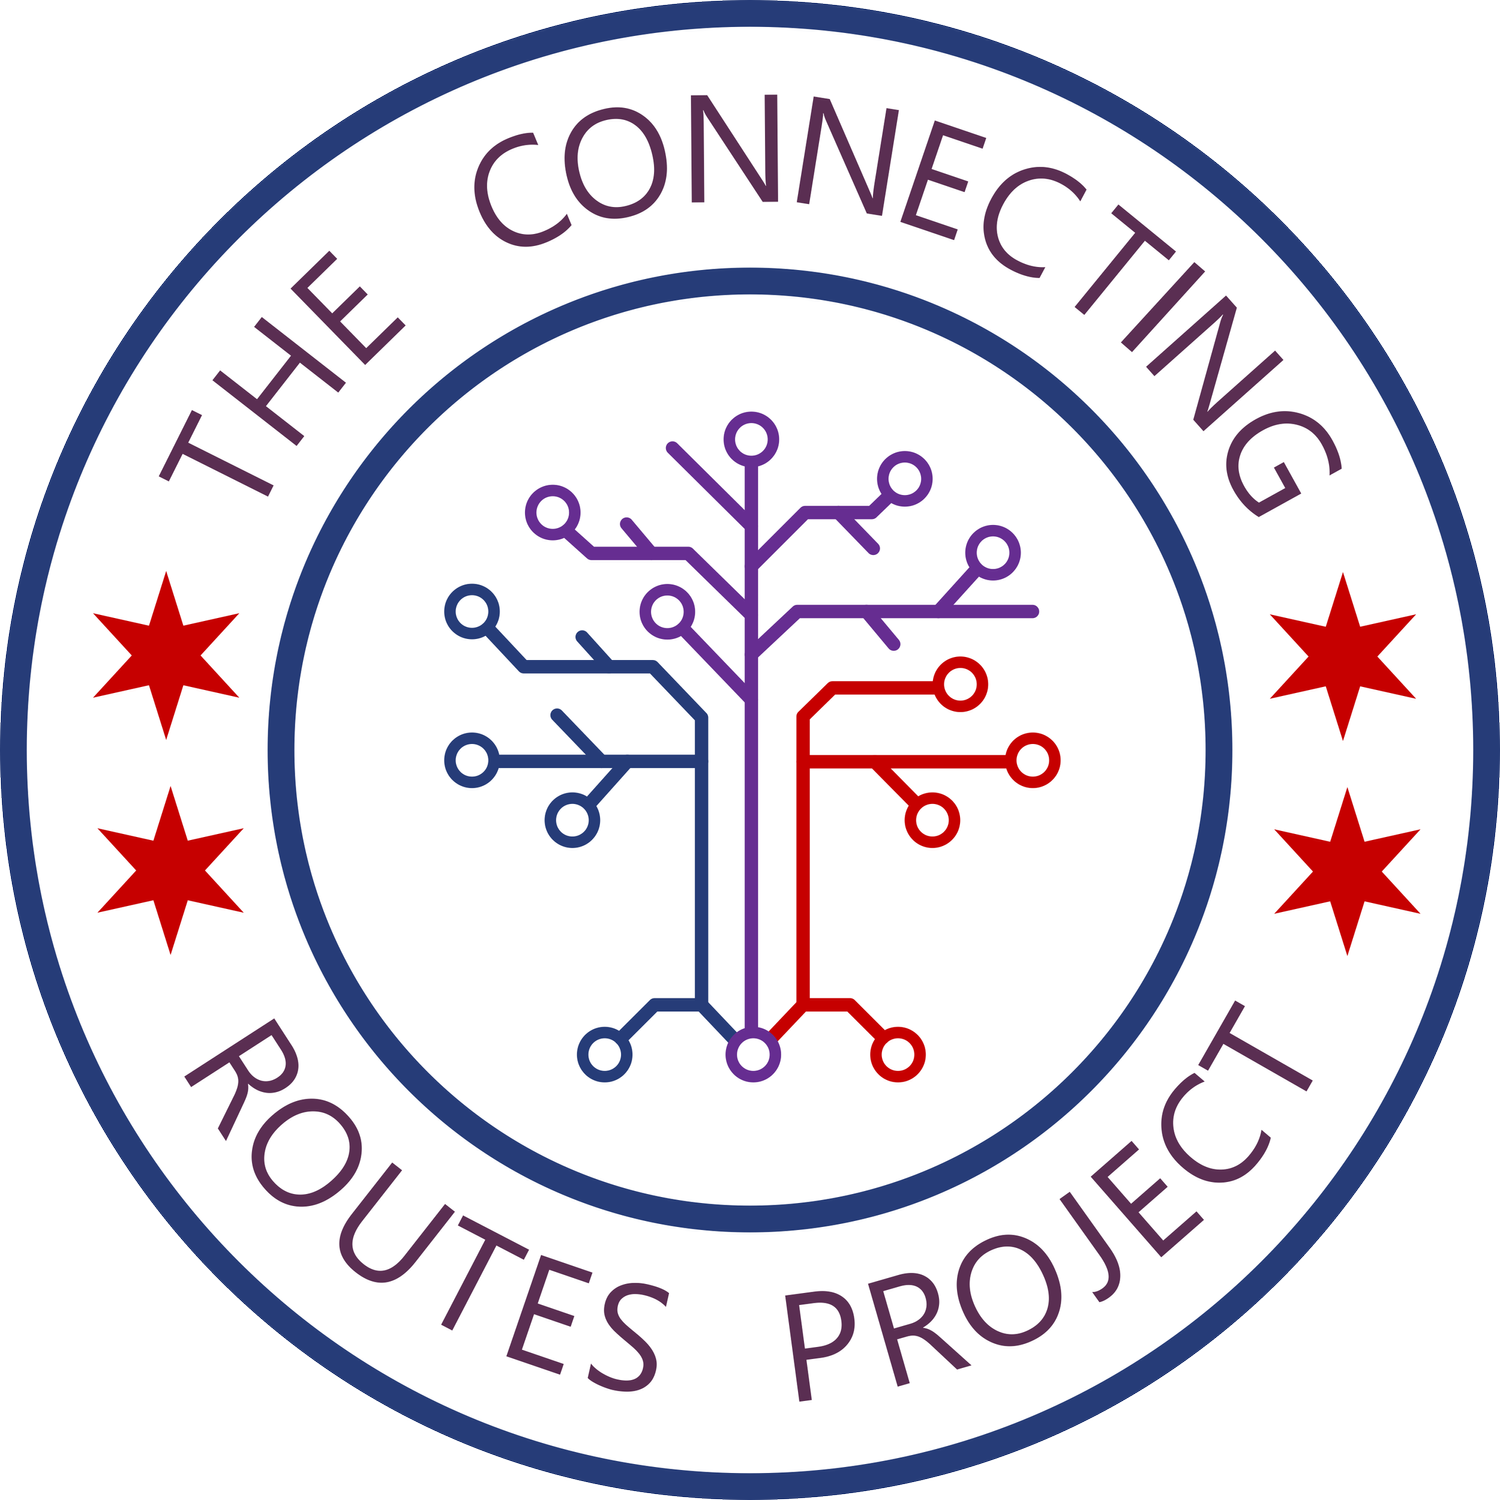 The Connecting Routes Project